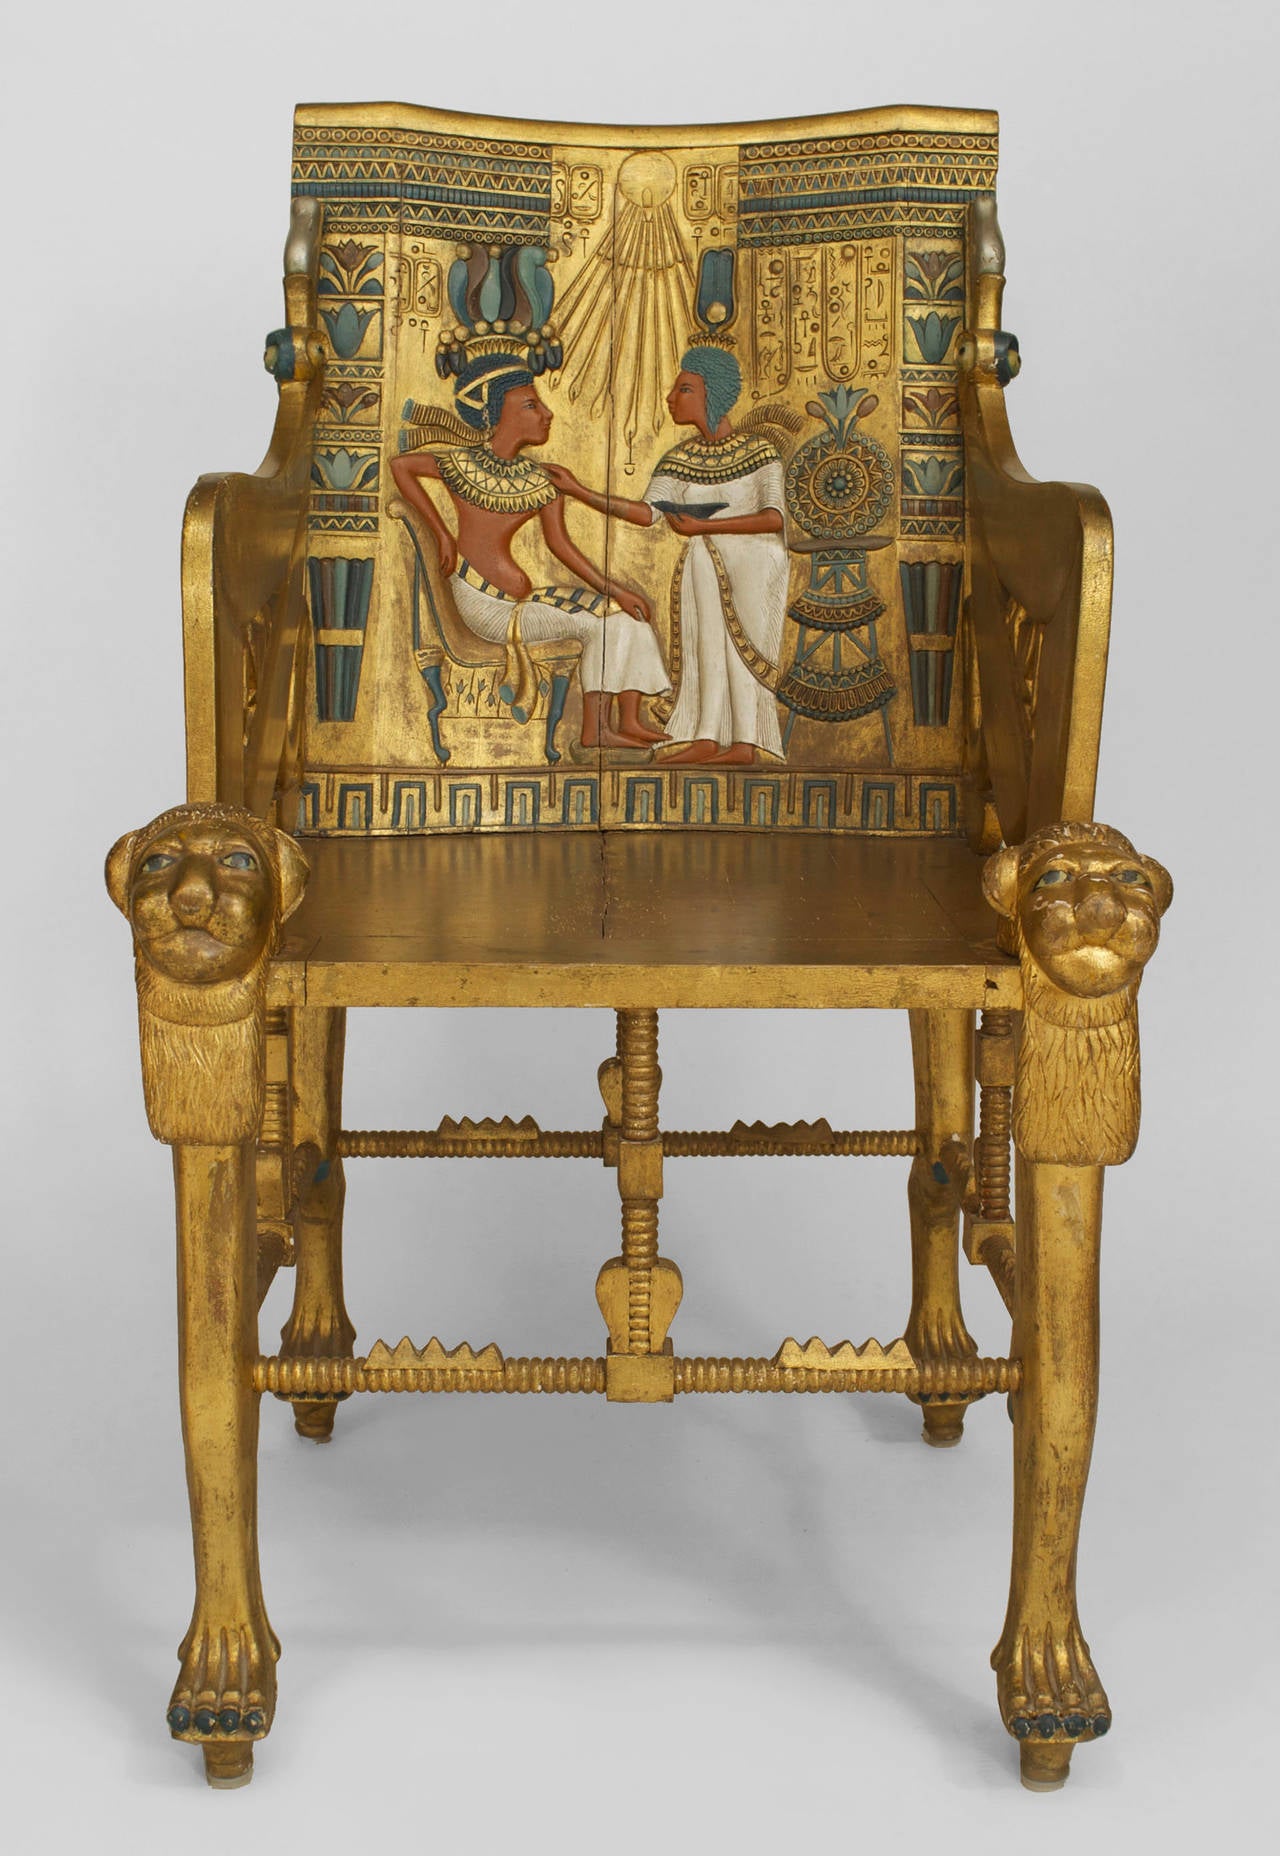 Egyptian Revival gilt armchair or throne with carved motifs and polychromed
relief with classical figures and hieroglyphics (possibly English, 1890s)